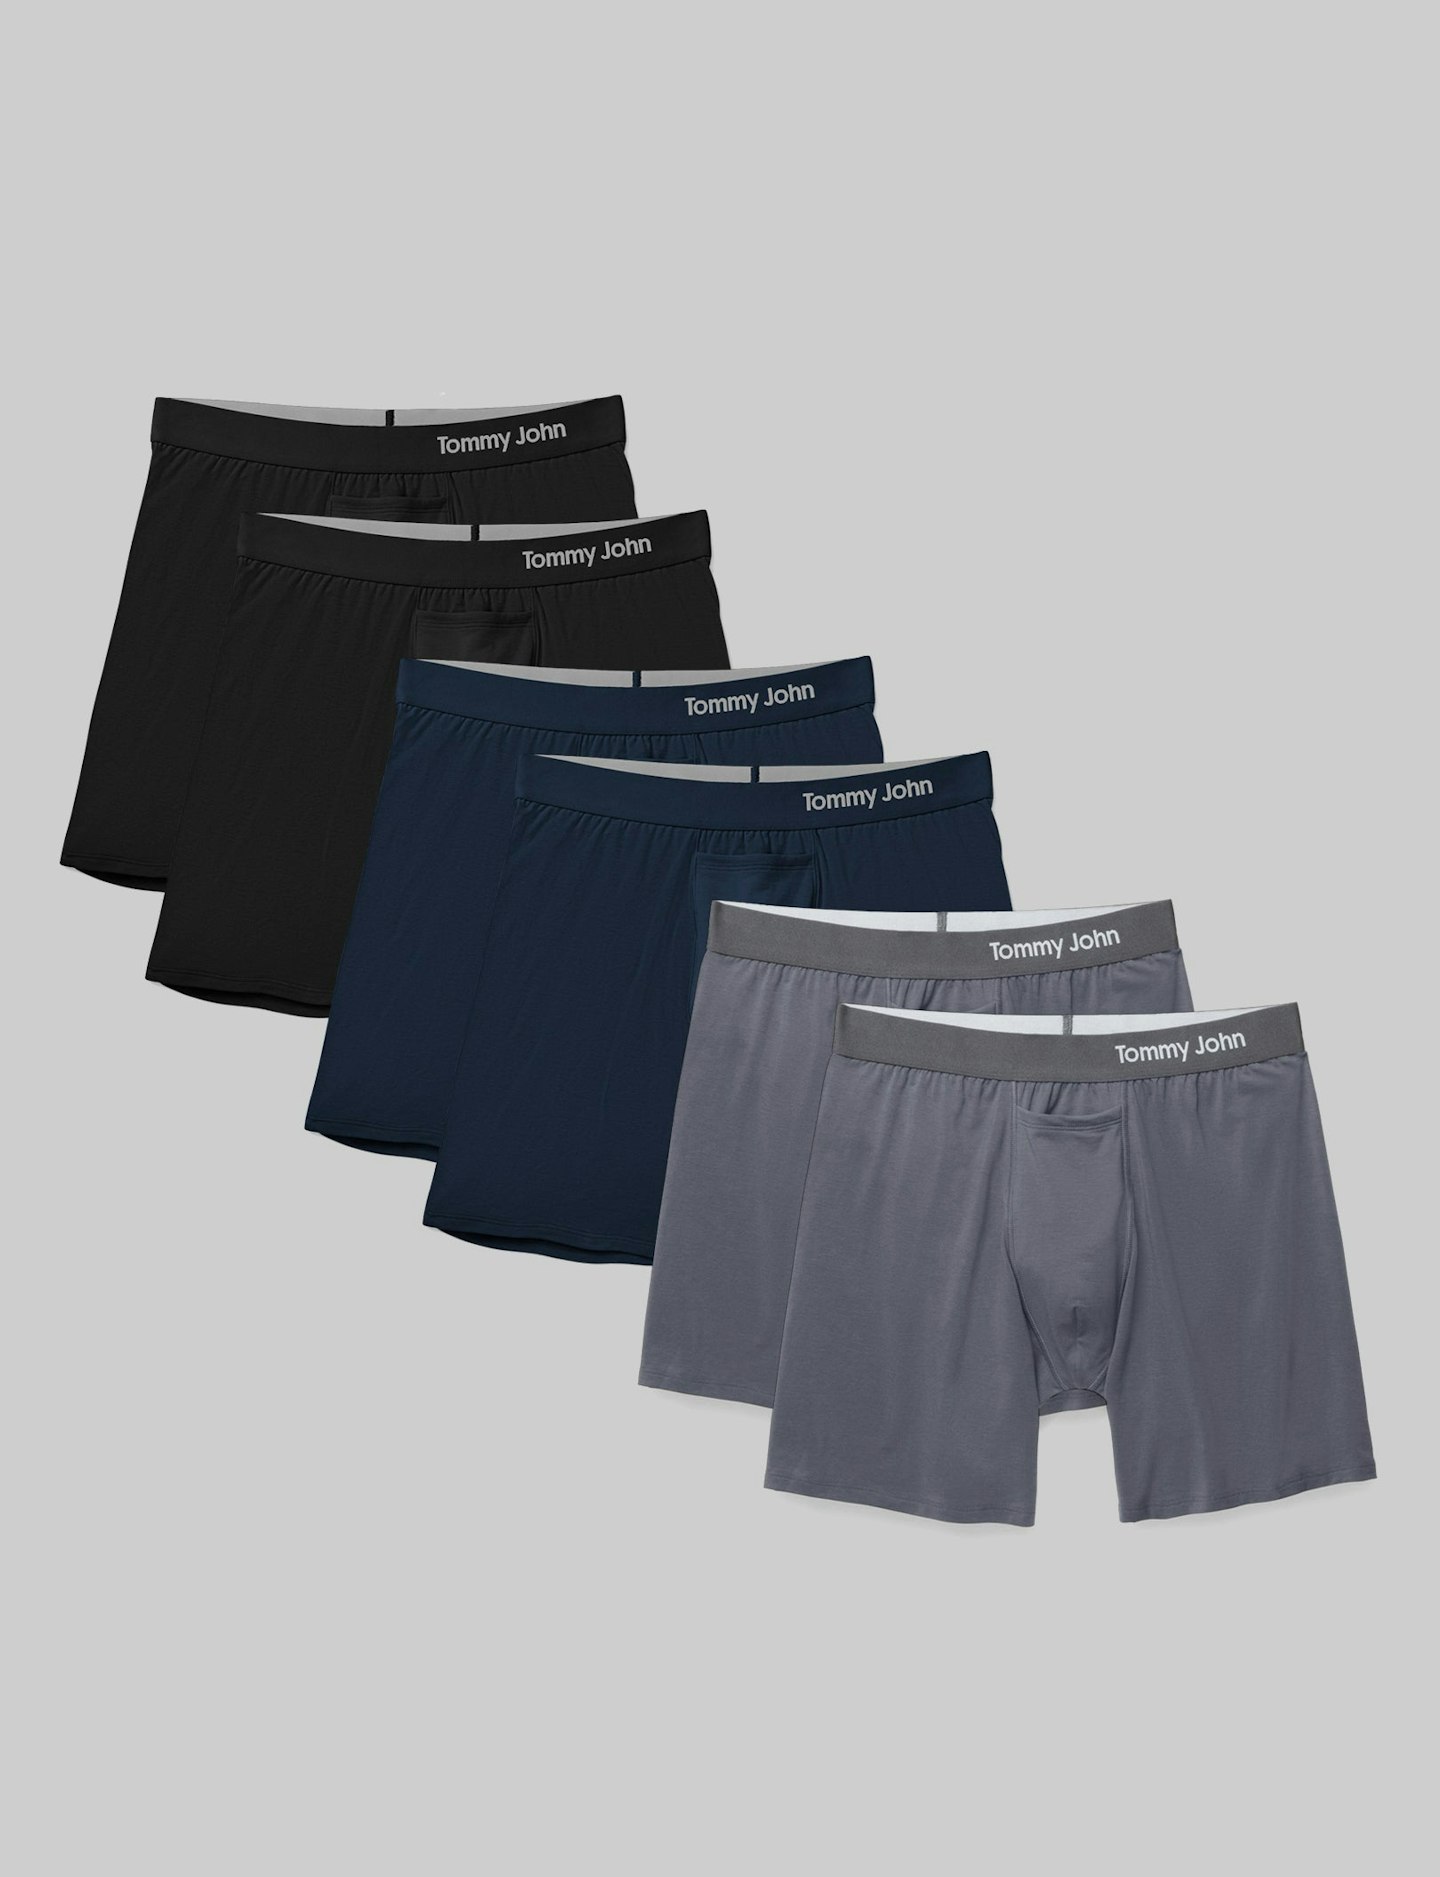  Tommy John Men's Cool Cotton Relaxed Fit Boxers - 3 Pack - No  Ride-Up Comfortable Breathable Underwear for Men (Black, Small) : Clothing,  Shoes & Jewelry